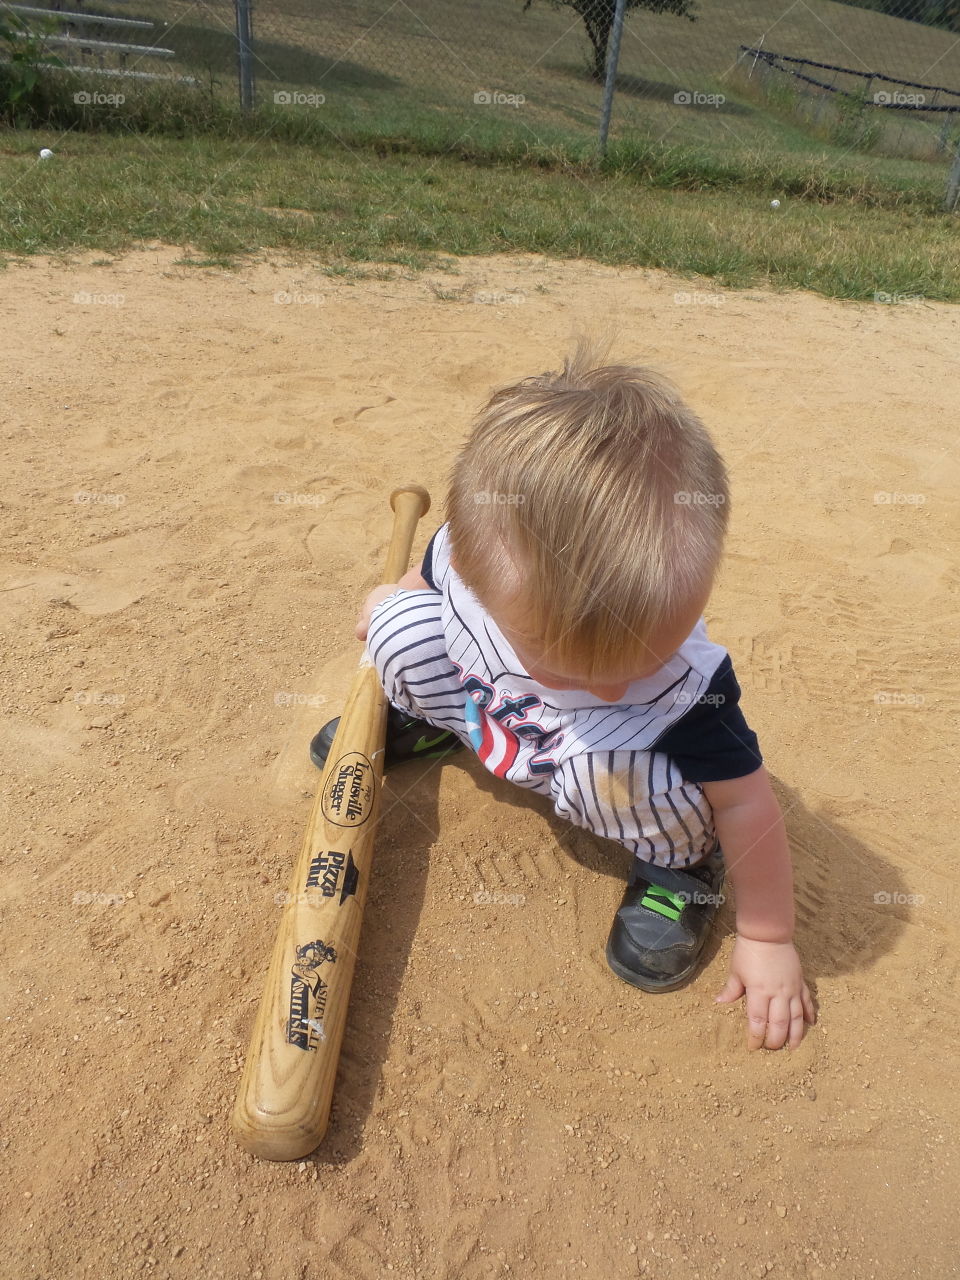 Baseball kid. playing in the dirt